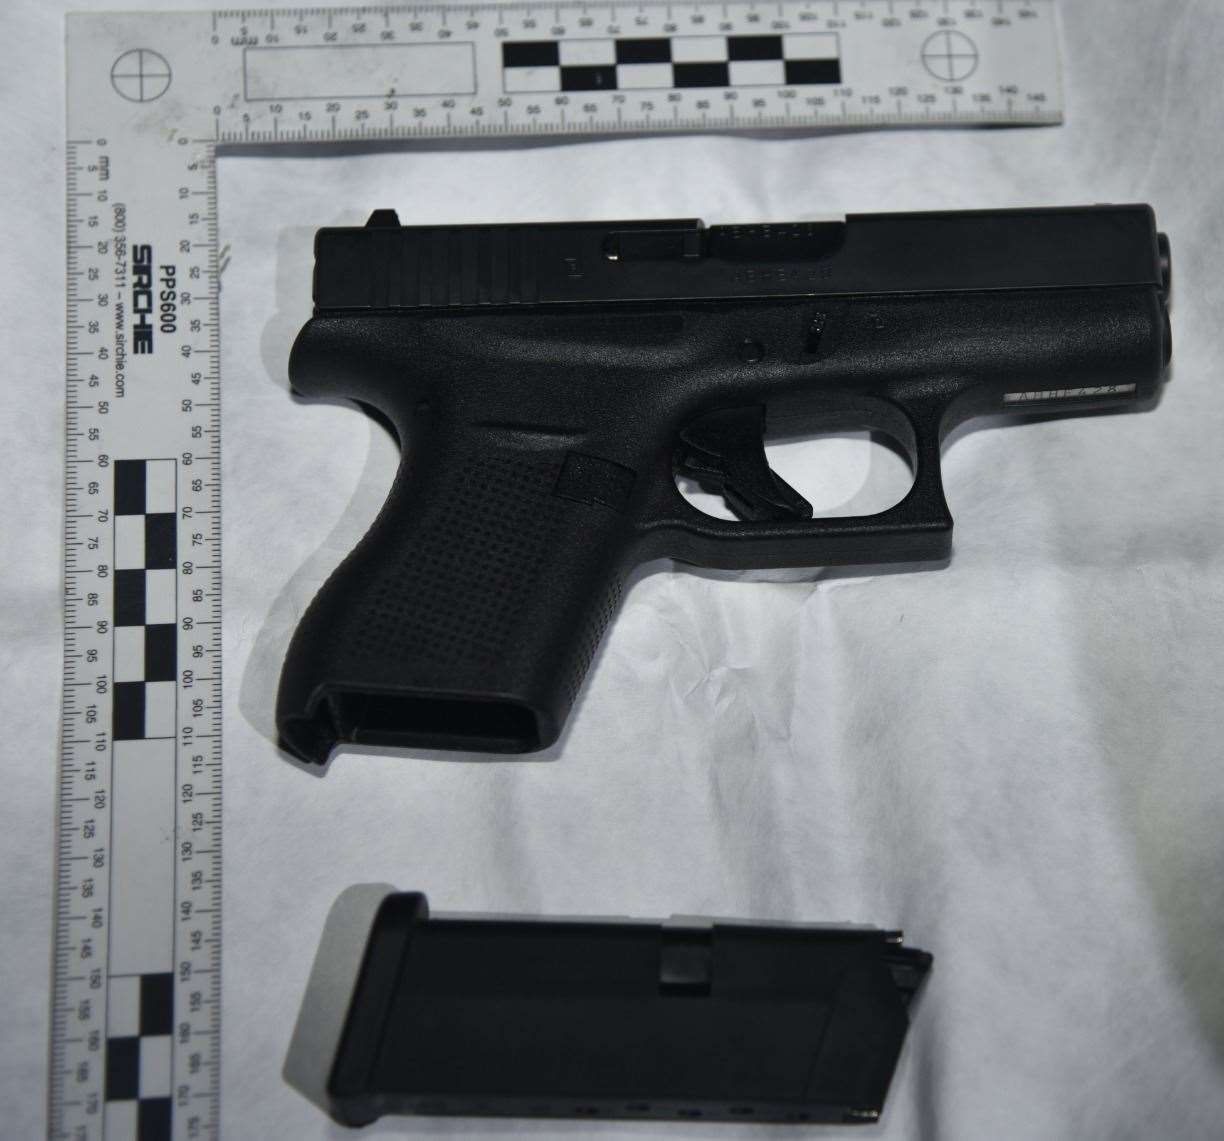 A Glock pistol similar to the one used to threaten the Marden couple. Picture NCA